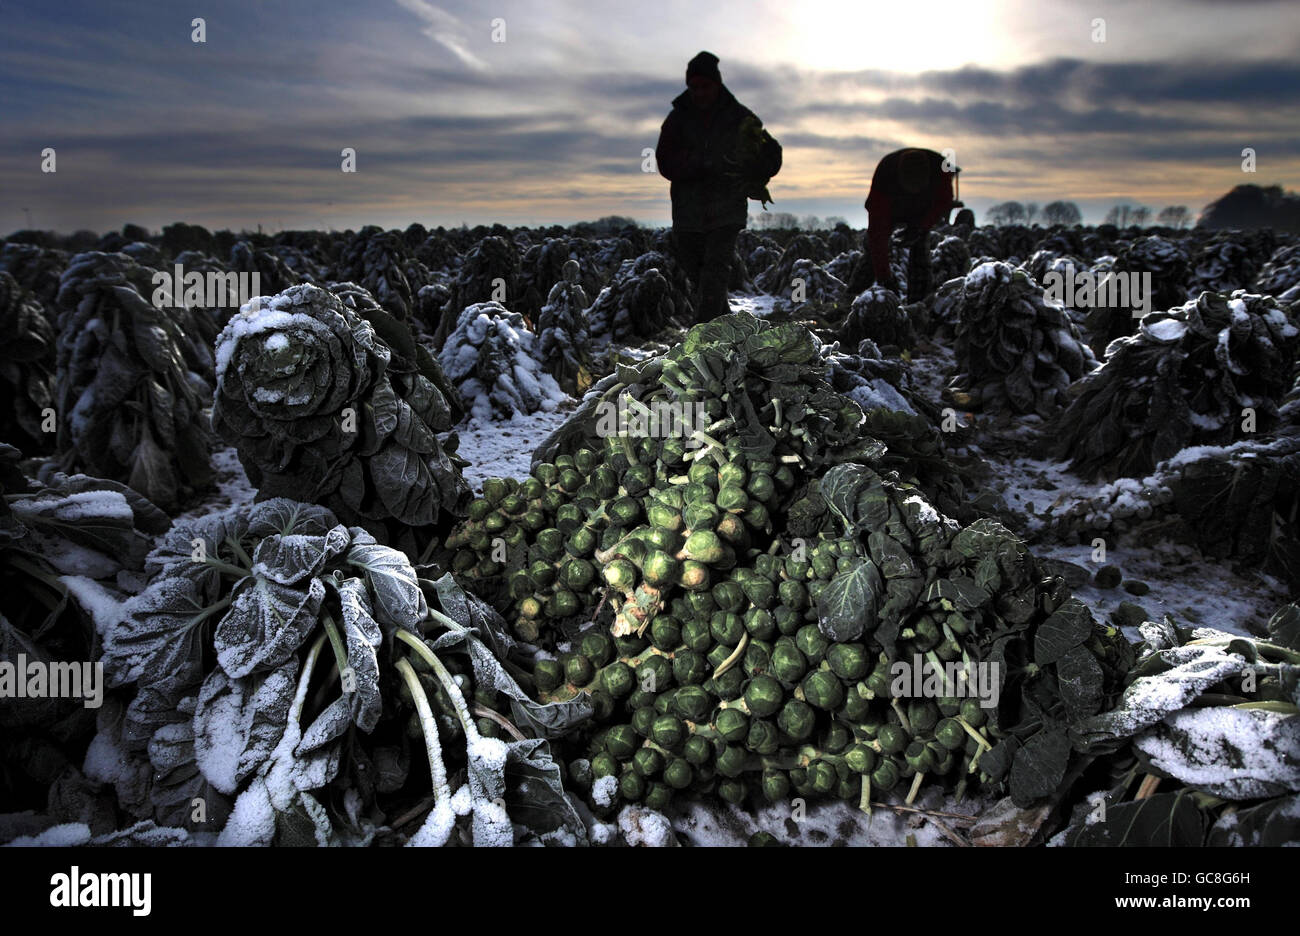 Mike Parry and Adam Walters work in the sprout fields at Essington, near Wolverhampton, as the shortage of sprouts due to the winter weather continues. Stock Photo